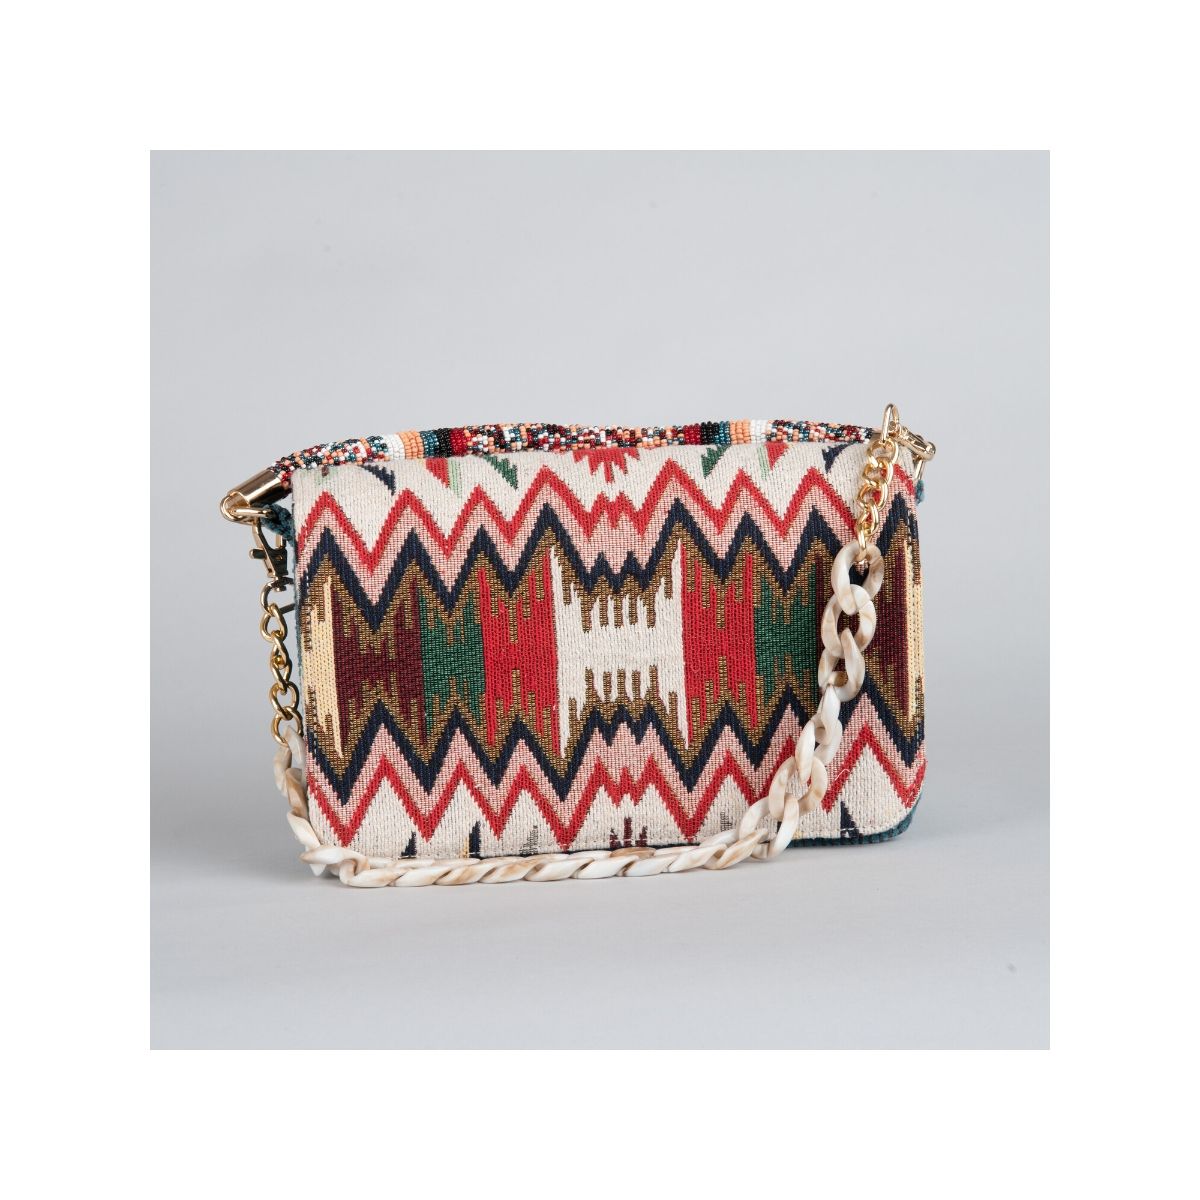 ETCETERA Women Hand Bag In Suede And Multicolour Cotton Fabric (Multi-Color) At Nykaa, Best Beauty Products Online